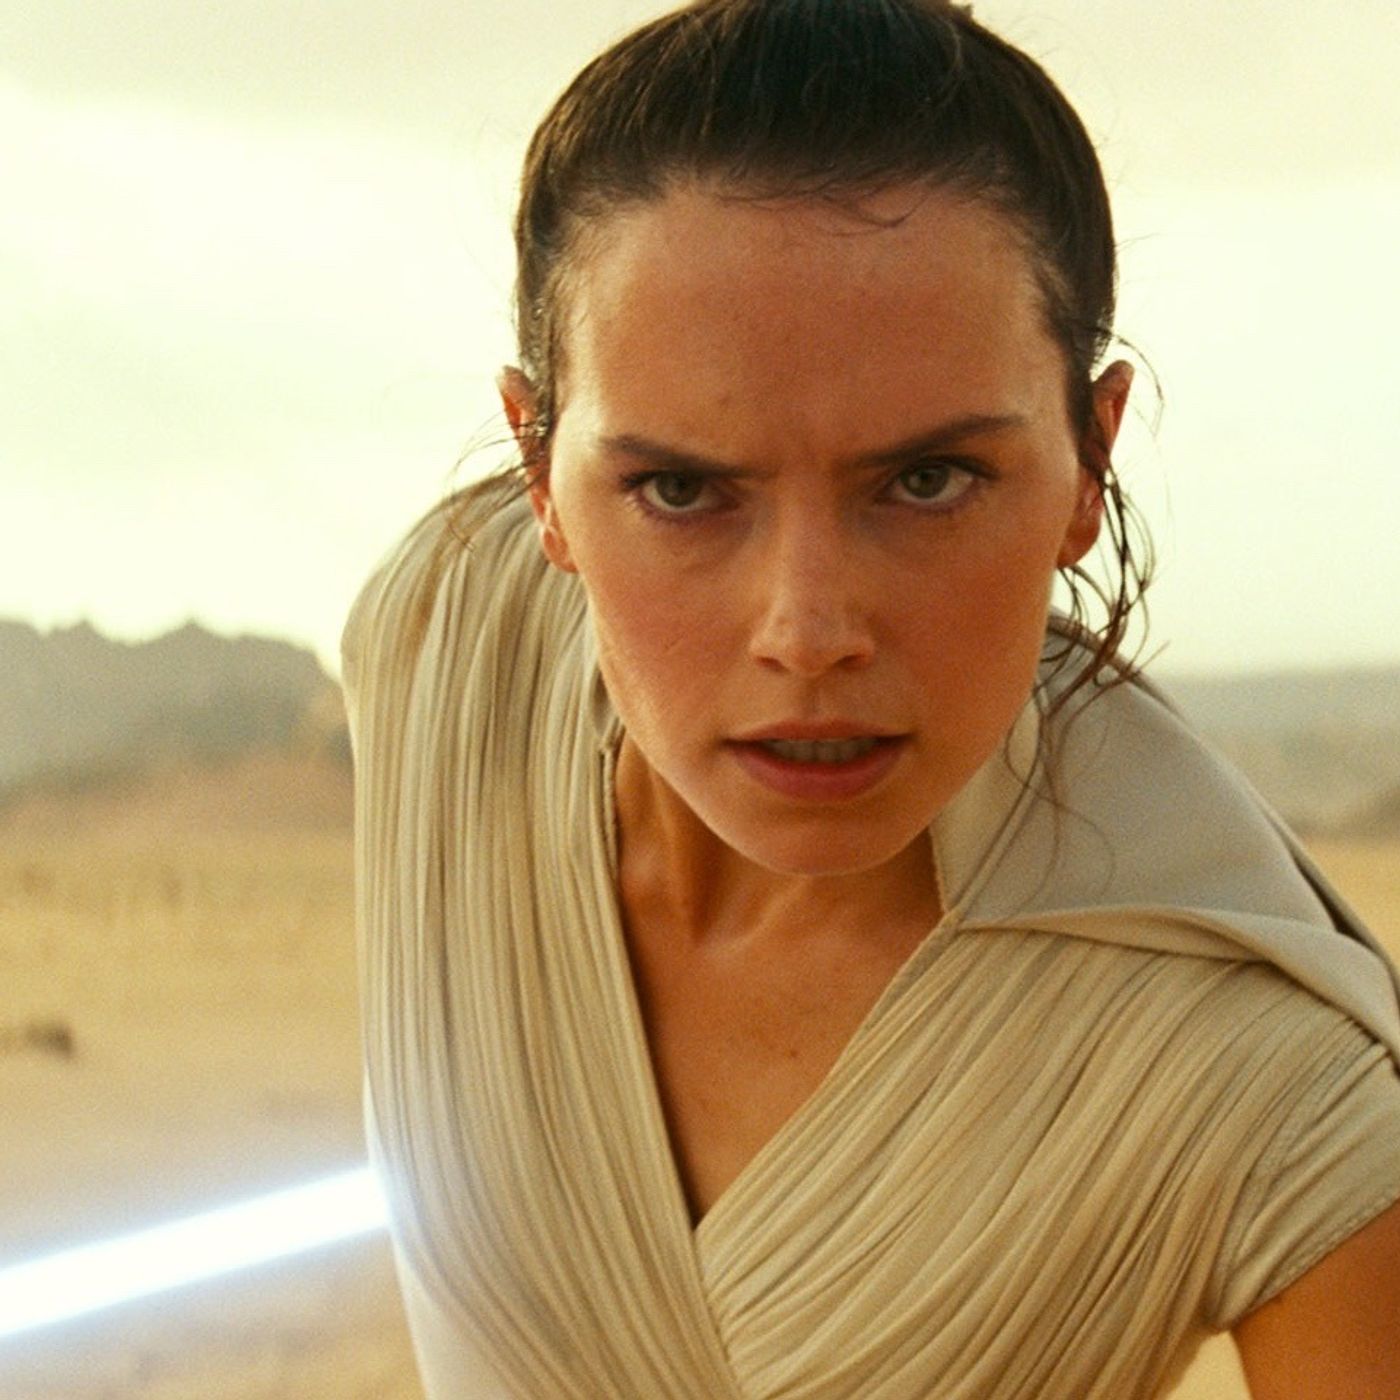 A Star Wars Podcast: The Rise of Skywalker Runtime Revealed and More!